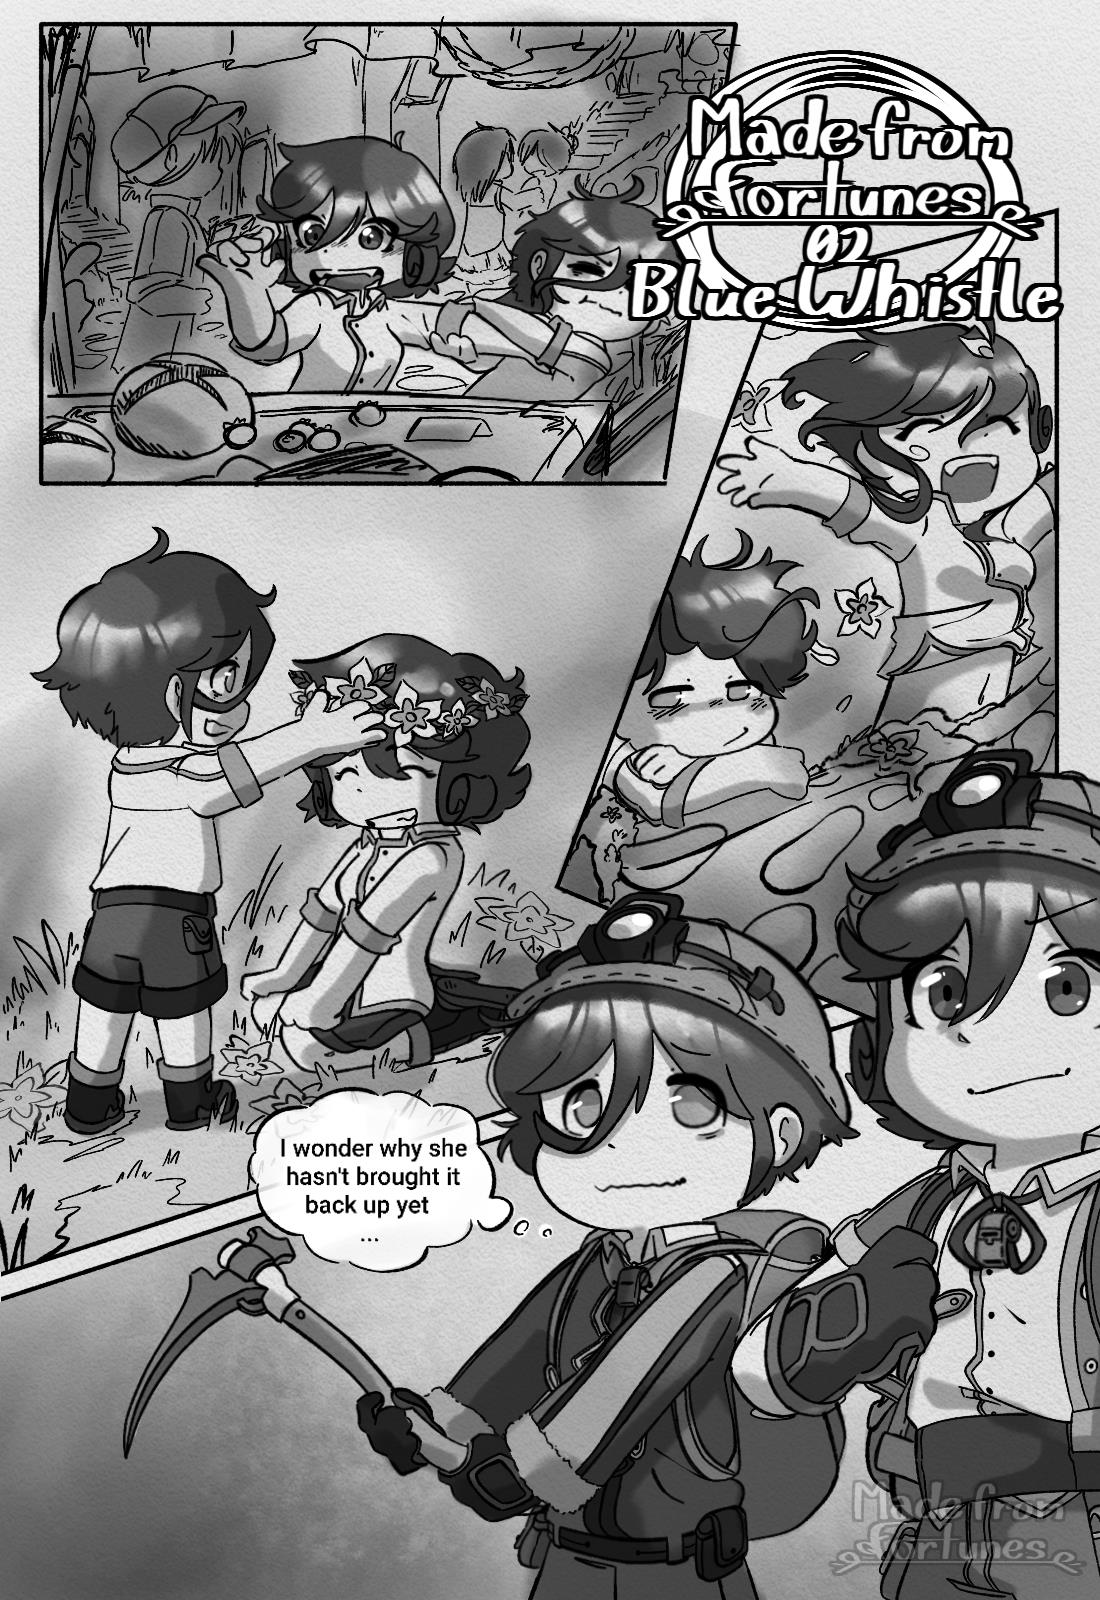 Made From Fortunes (Made In Abyss Fanmade Comic) Vol.1 Chapter 2: Blue Whistle - Picture 1